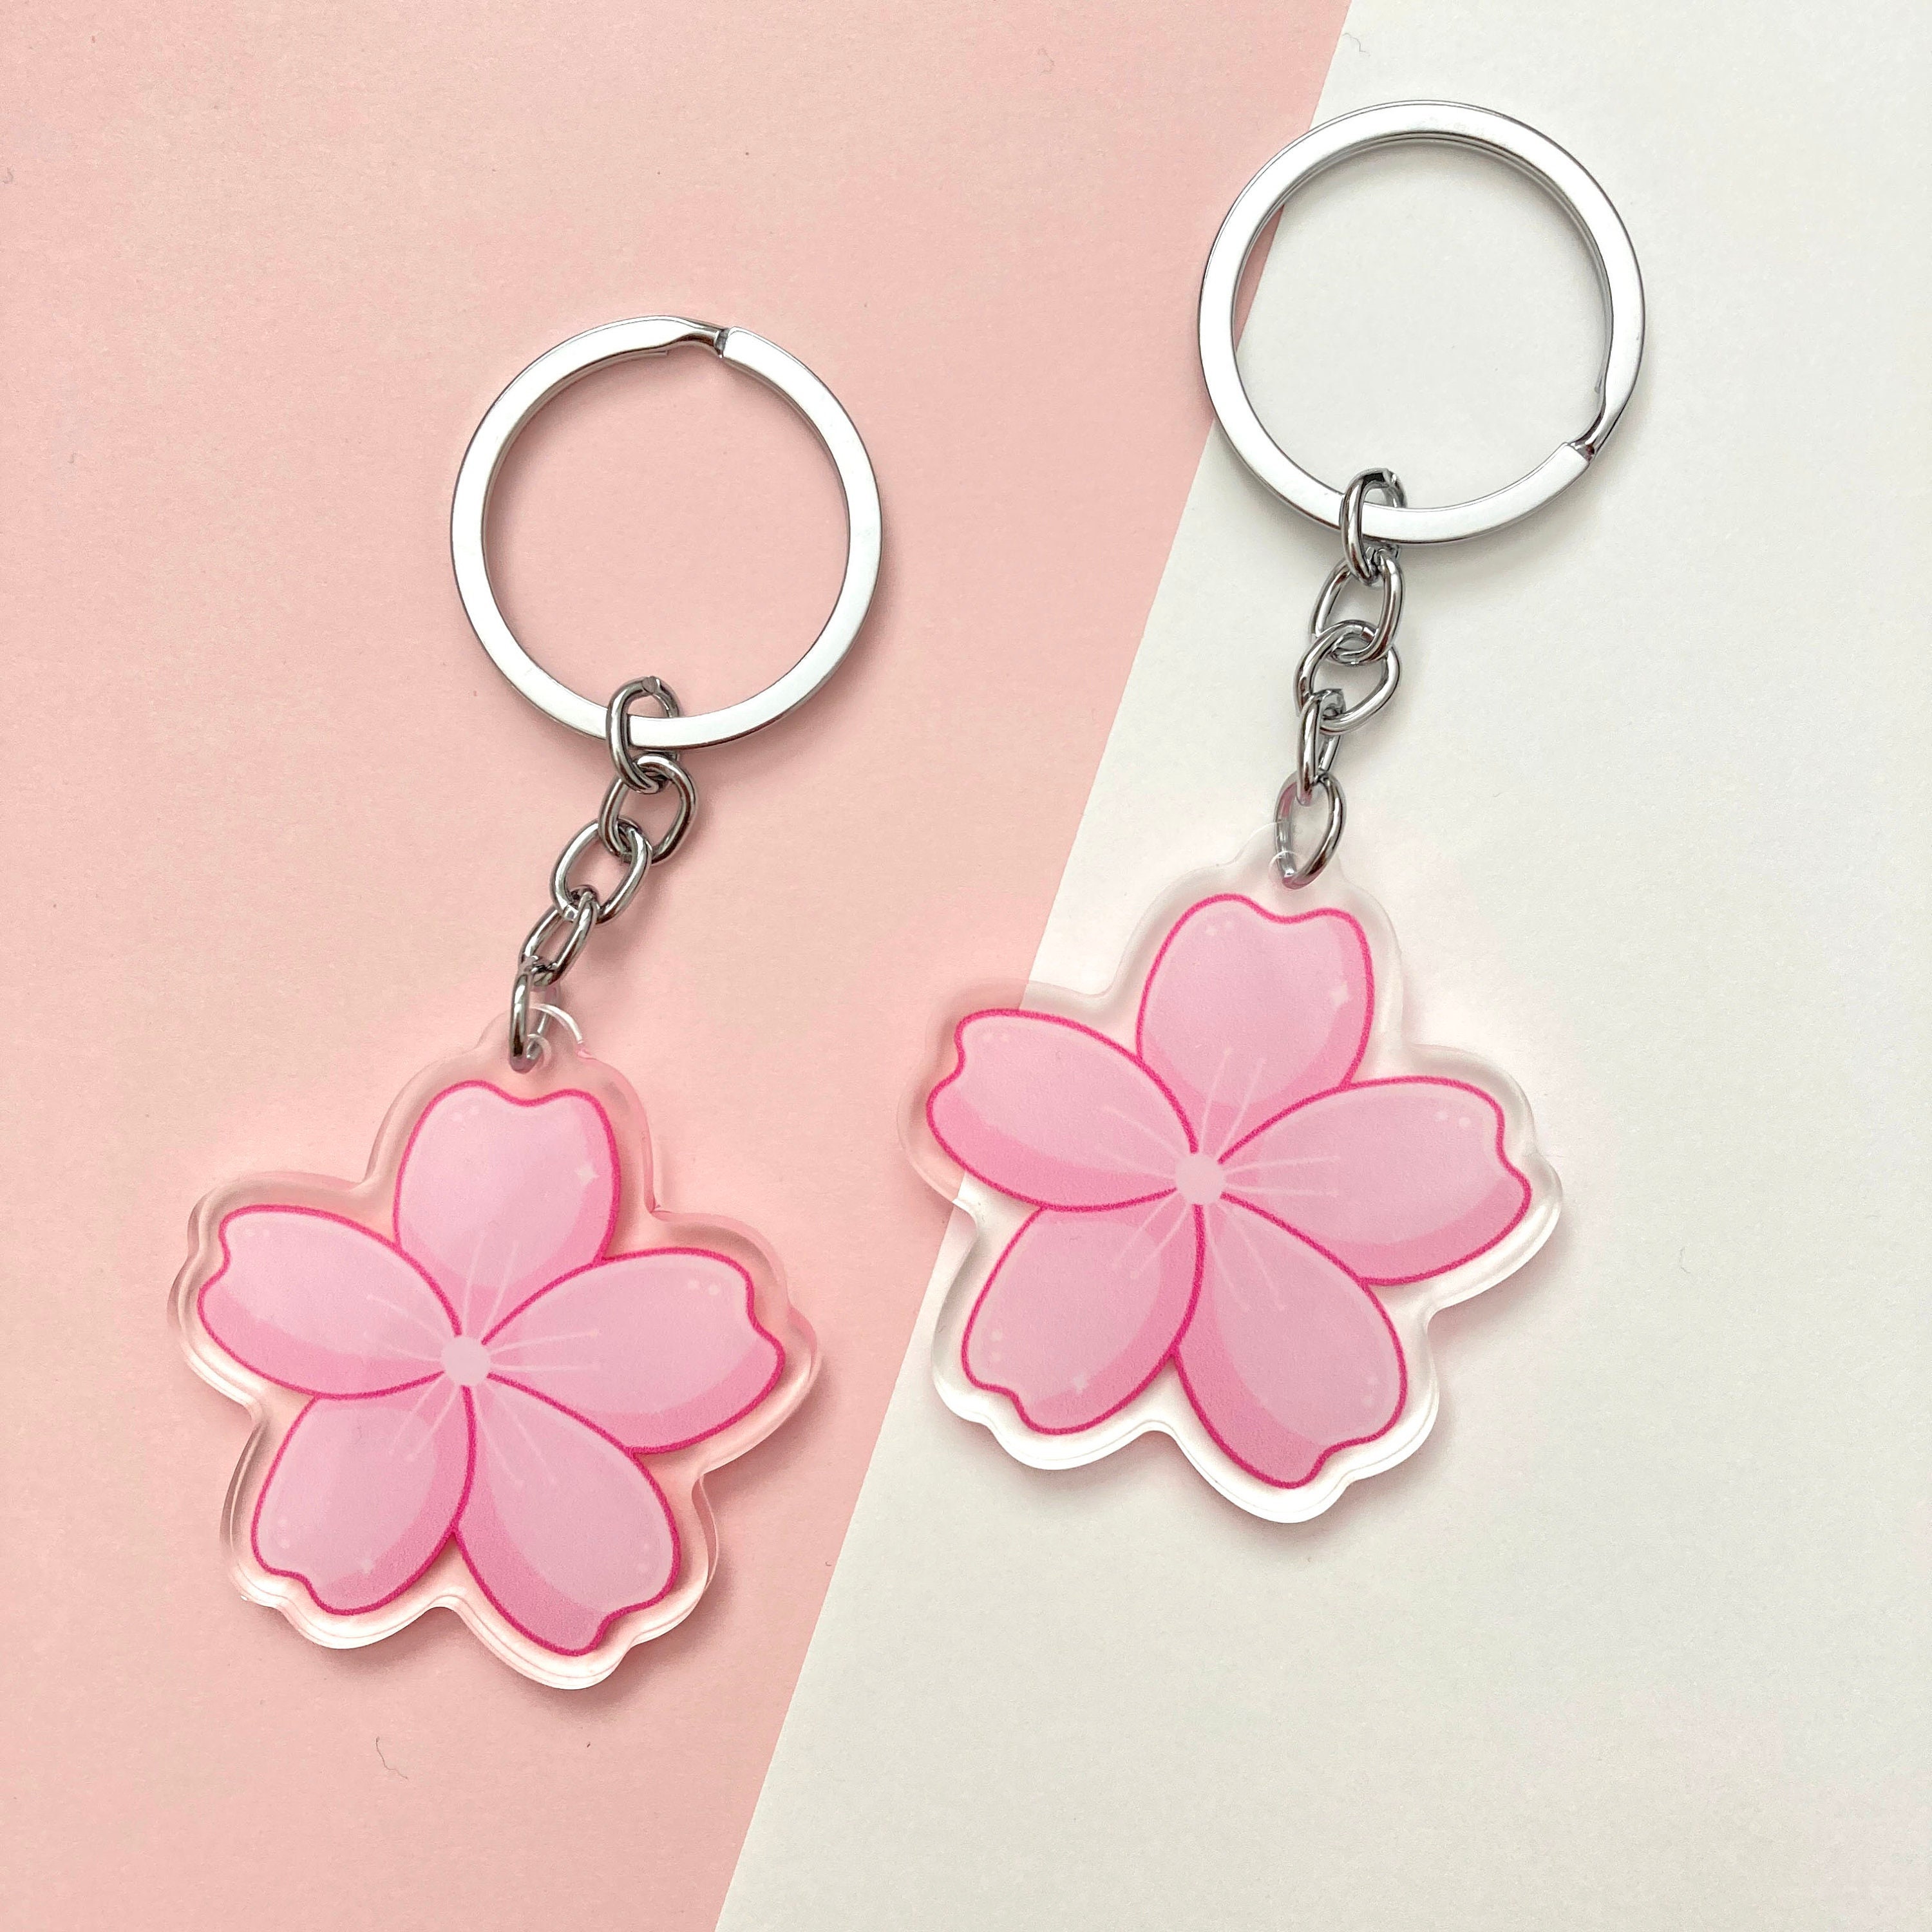 Monnel Women's Zinc Alloy Metal Flowers Cherry Blossoms and Letter B Charms  Key Ring Keychain Z626 at  Women's Clothing store